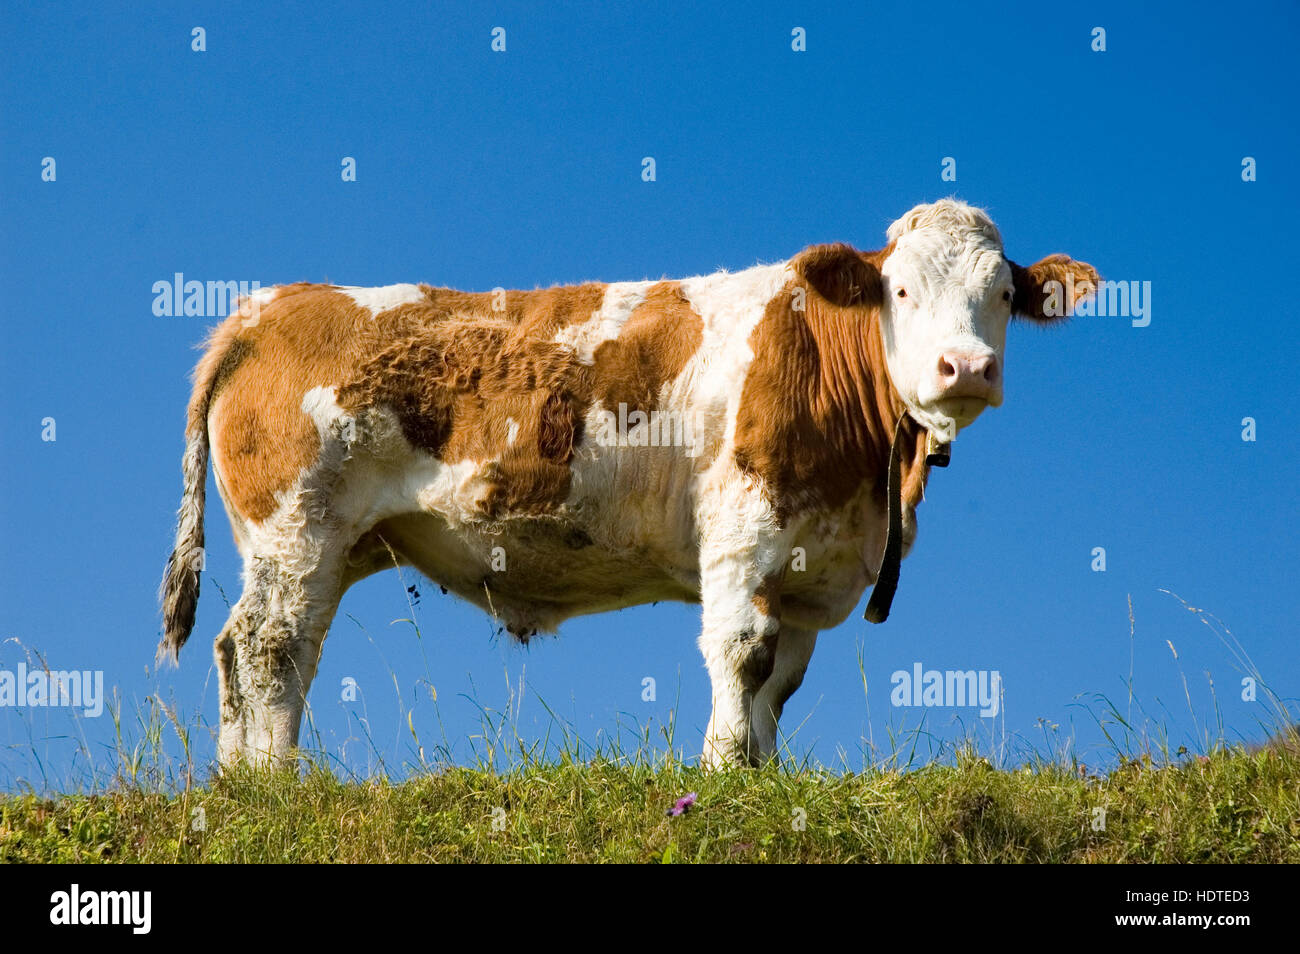 Cow on meadow in front of a blue sky, Reichraming, Upper Austria, Austria, Europe Stock Photo